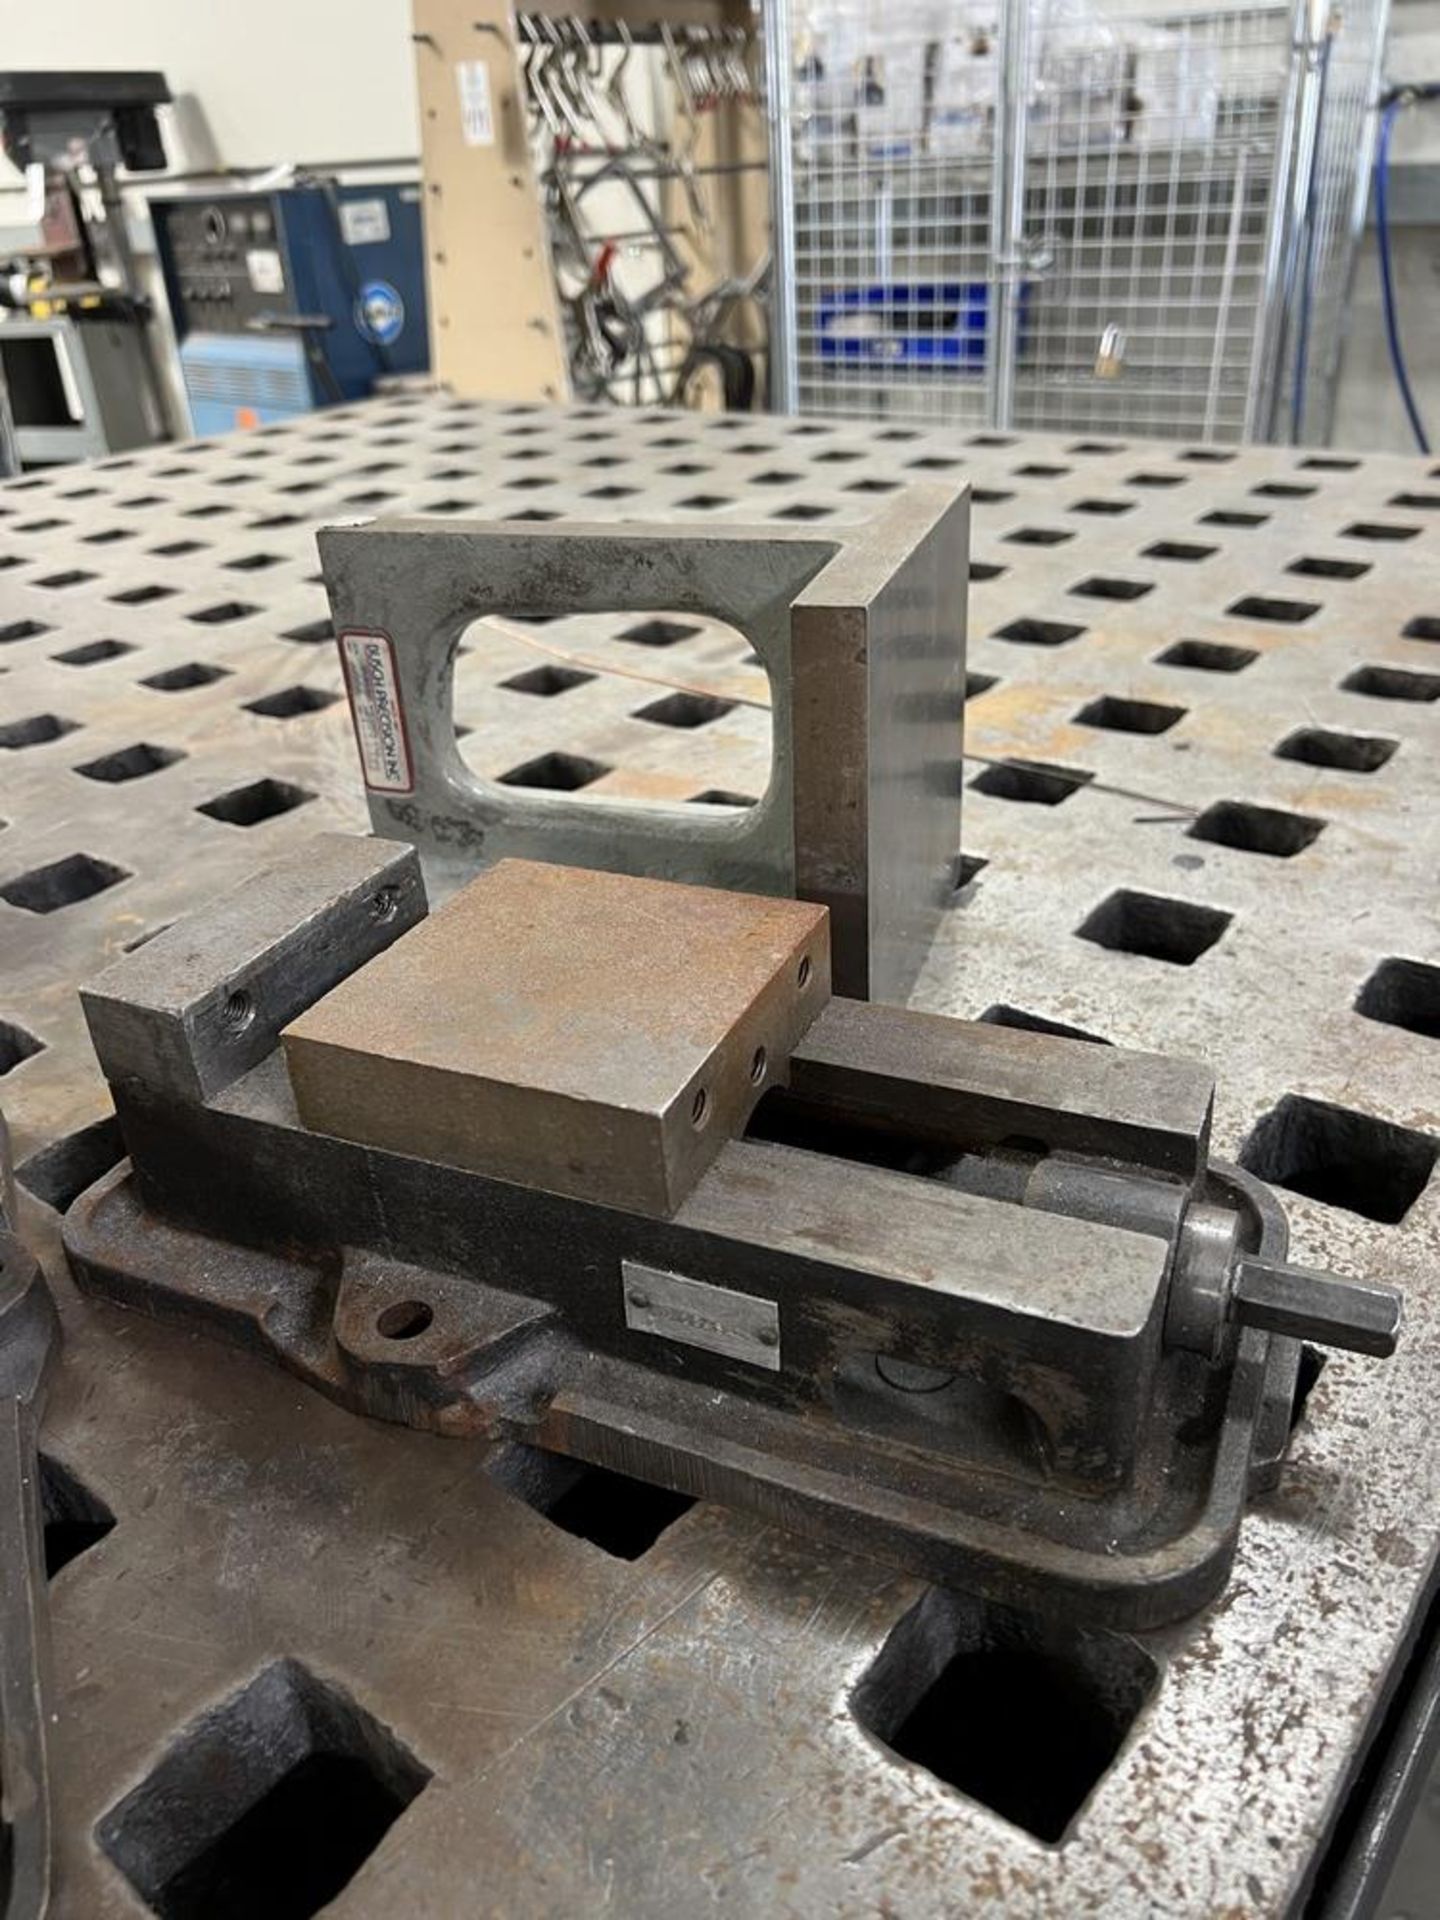 (2) 4" Table Vise Angle Plate, Busch Precision, Angle Plate, Positioning Fixture for Tig Torch, - Image 5 of 8